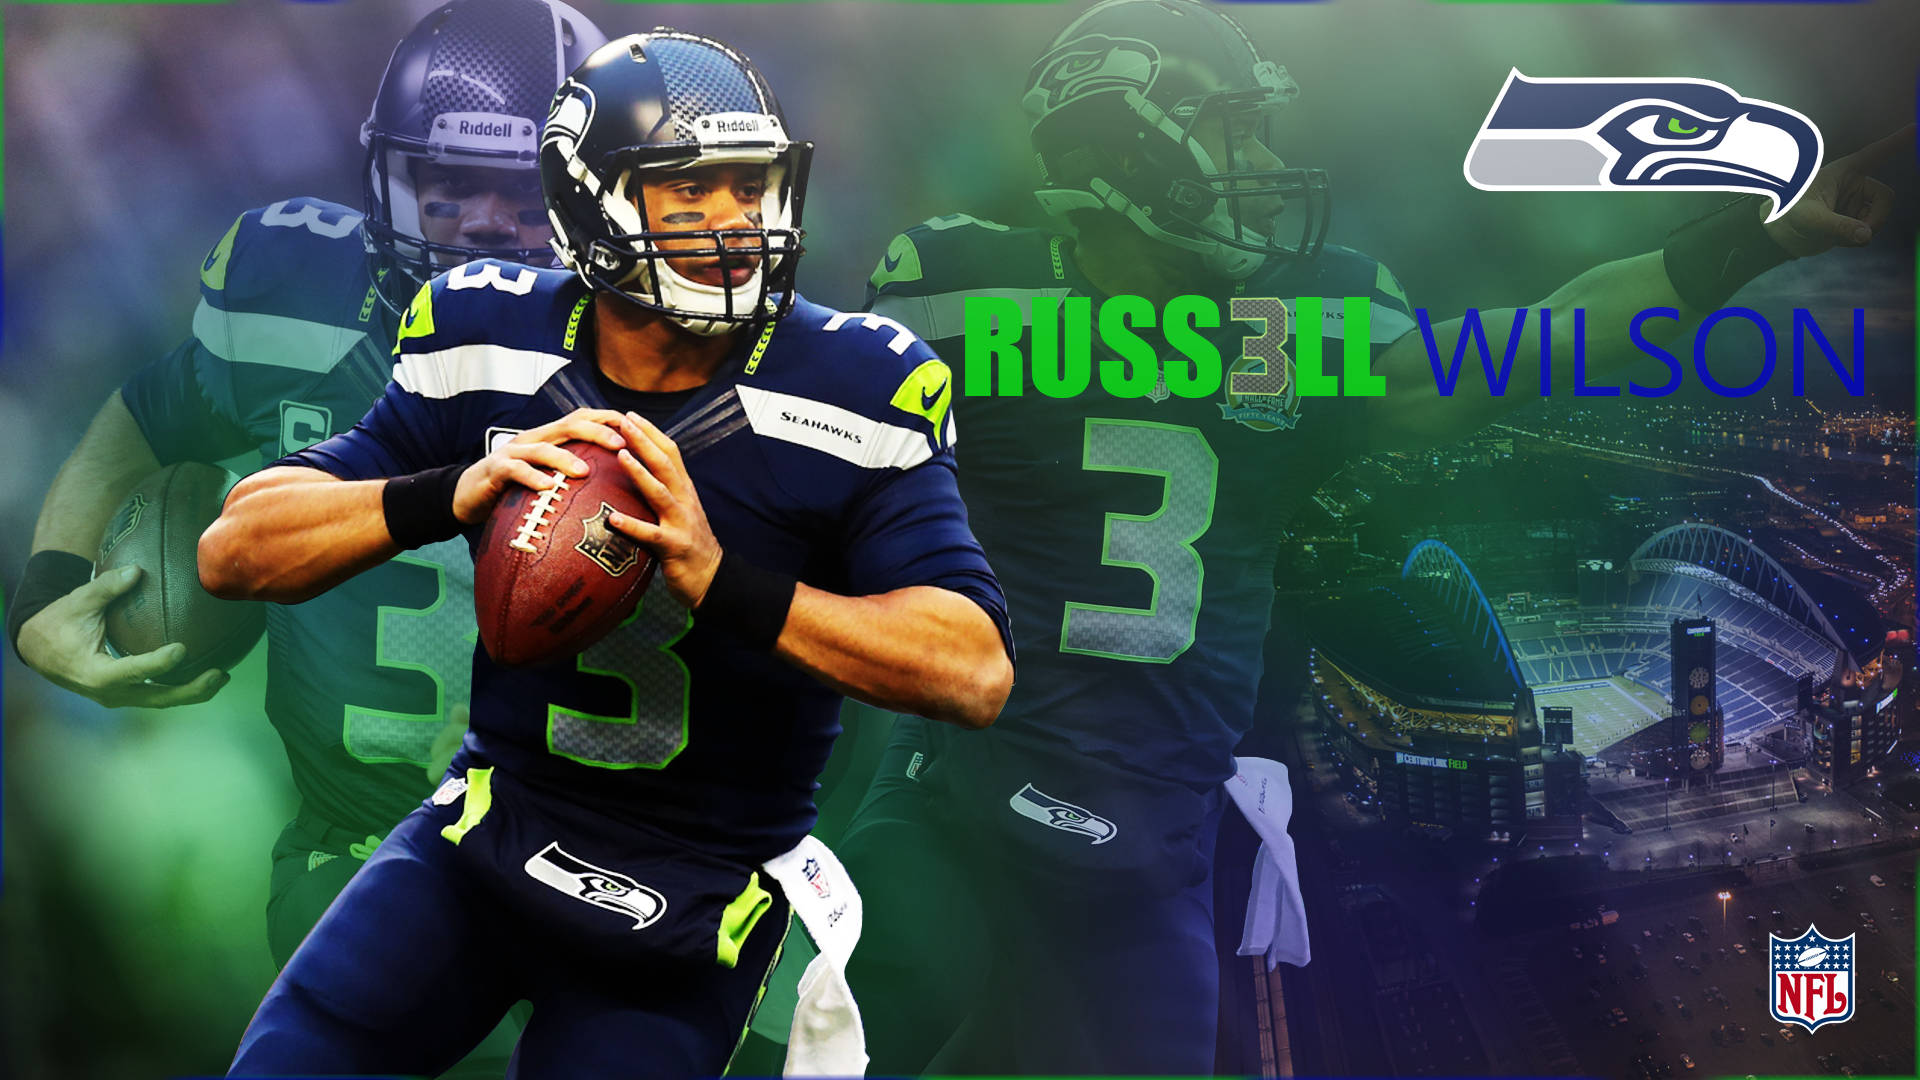 Download Russell Wilson Edit With Match Images Wallpaper